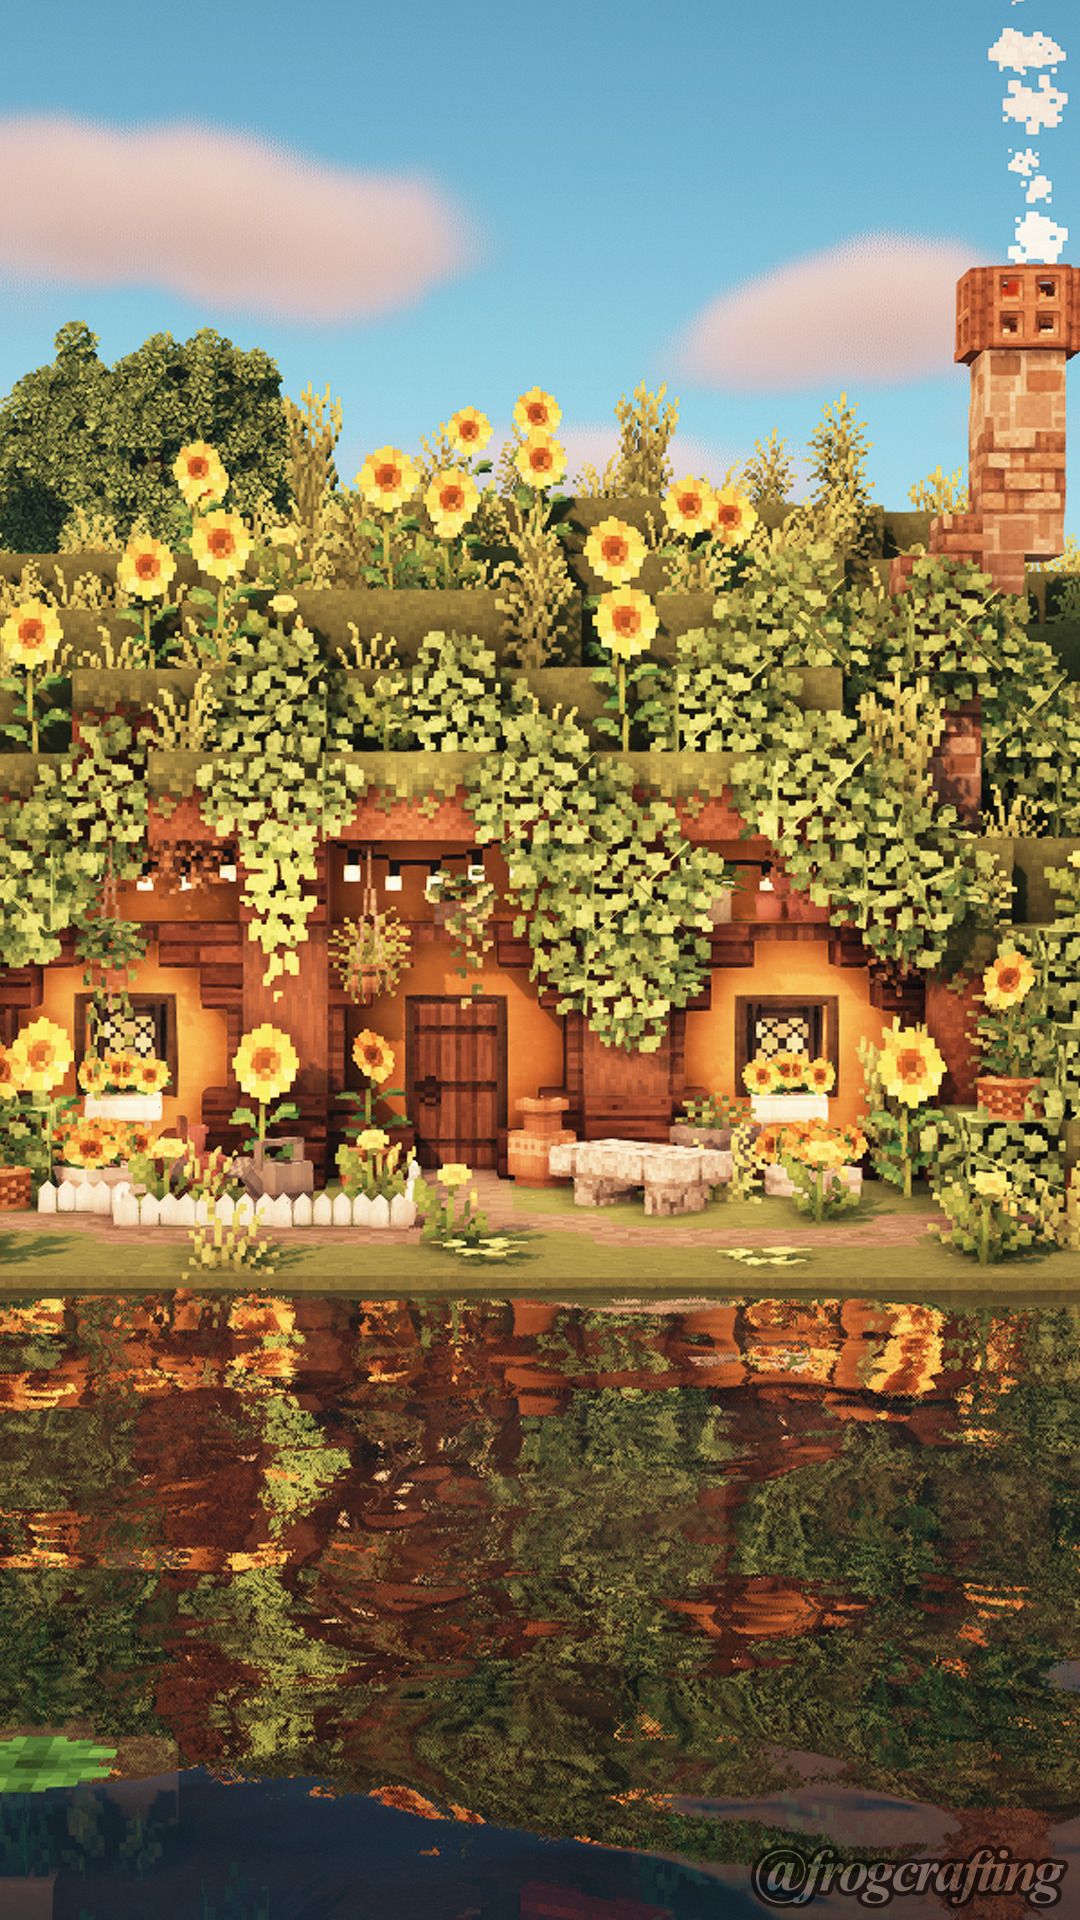 A Minecraft image of a small house with a thatched roof covered in sunflowers - Minecraft